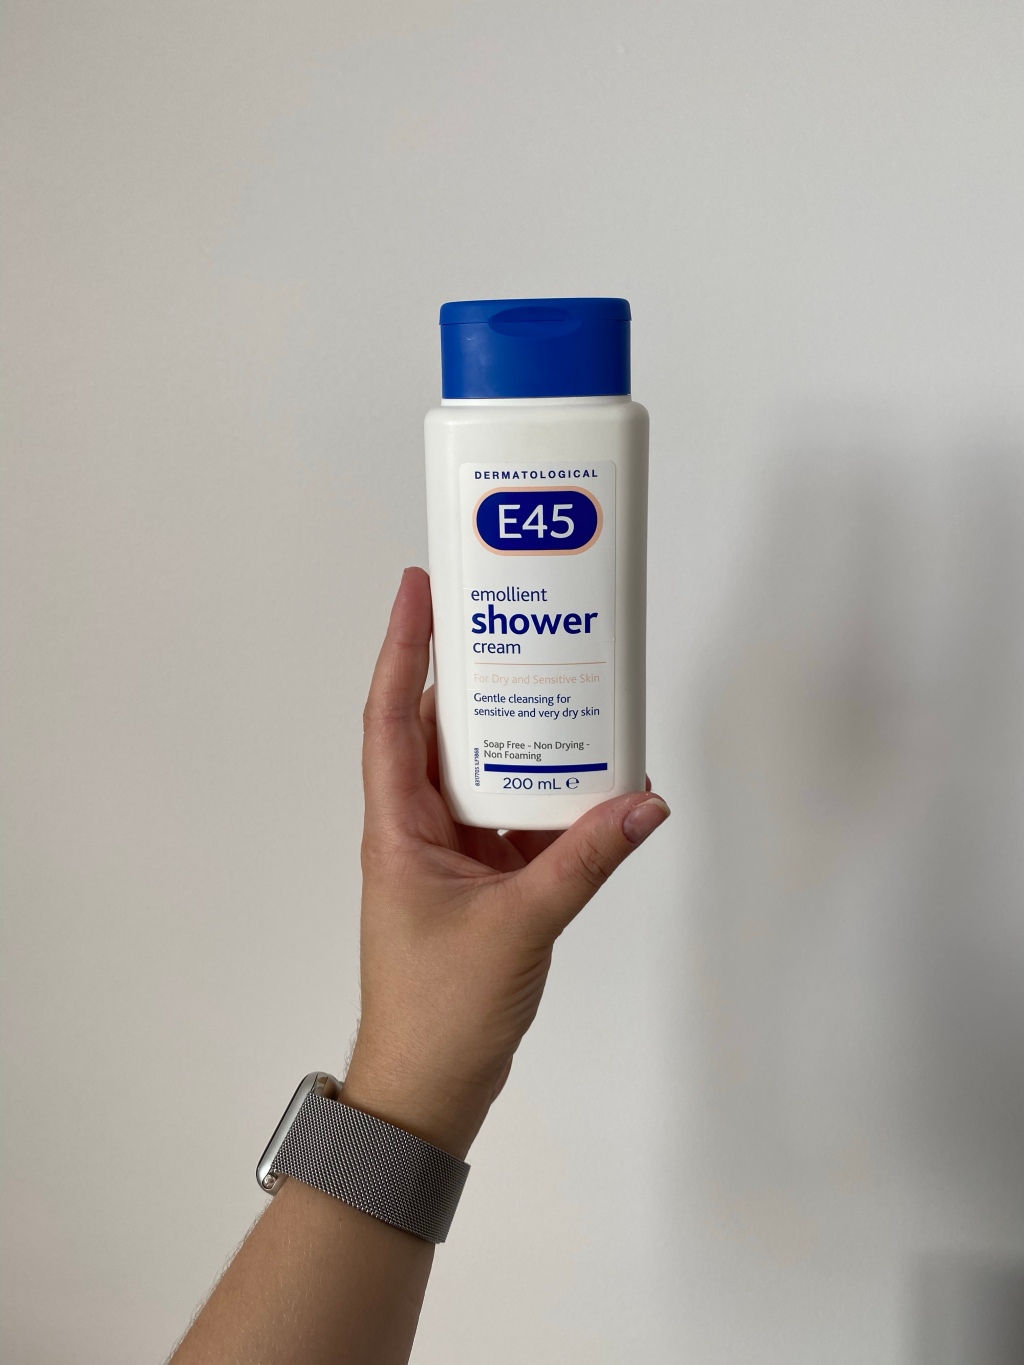 An eczema friendly shower cream that hardly cleans